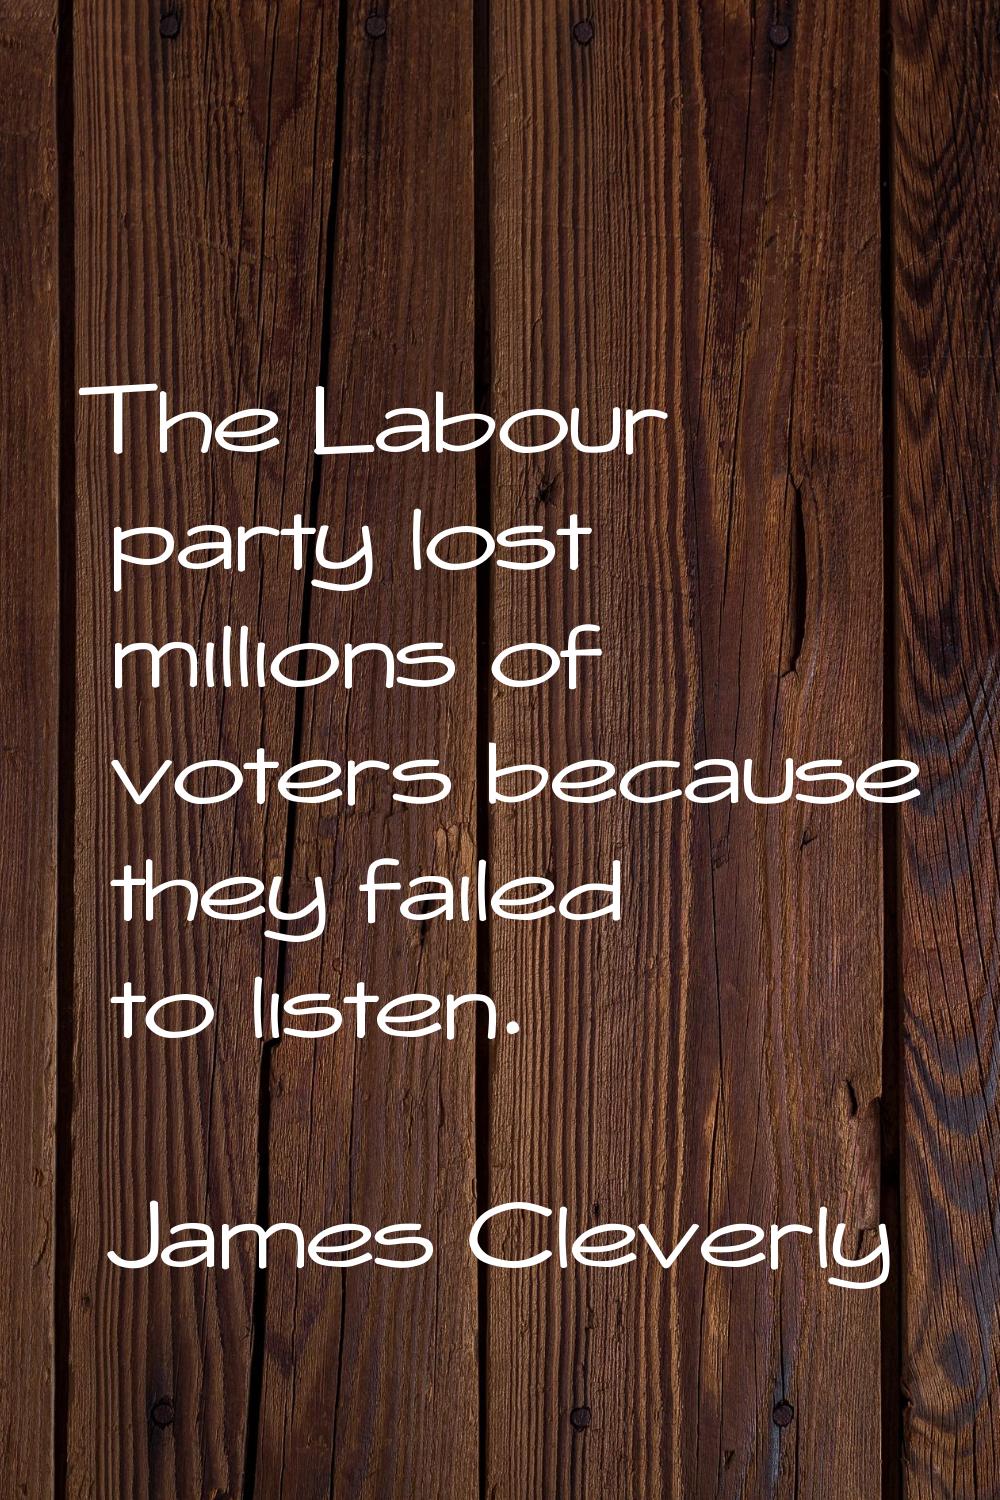 The Labour party lost millions of voters because they failed to listen.